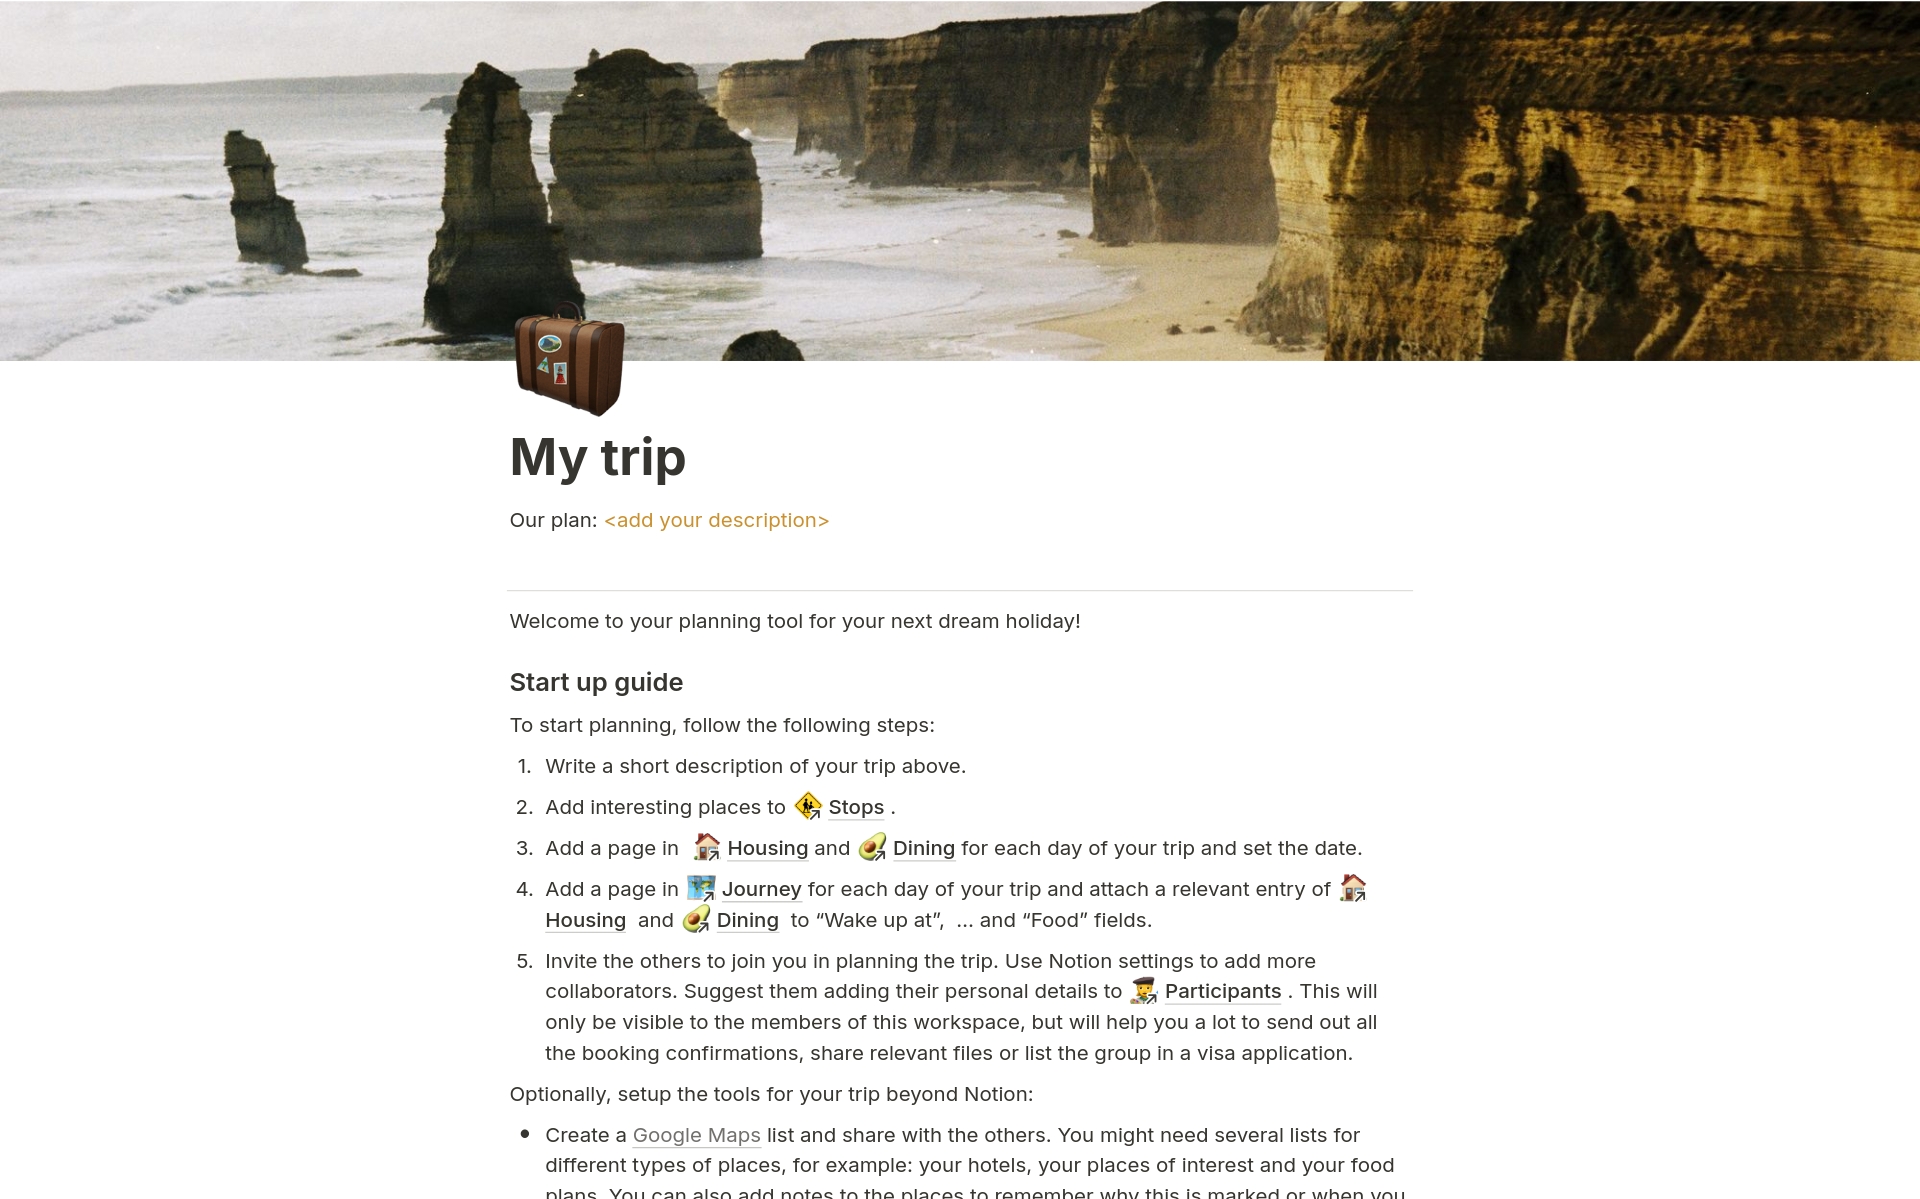 Day by day activities and stays planner with additional sections to plan a trip as a group.